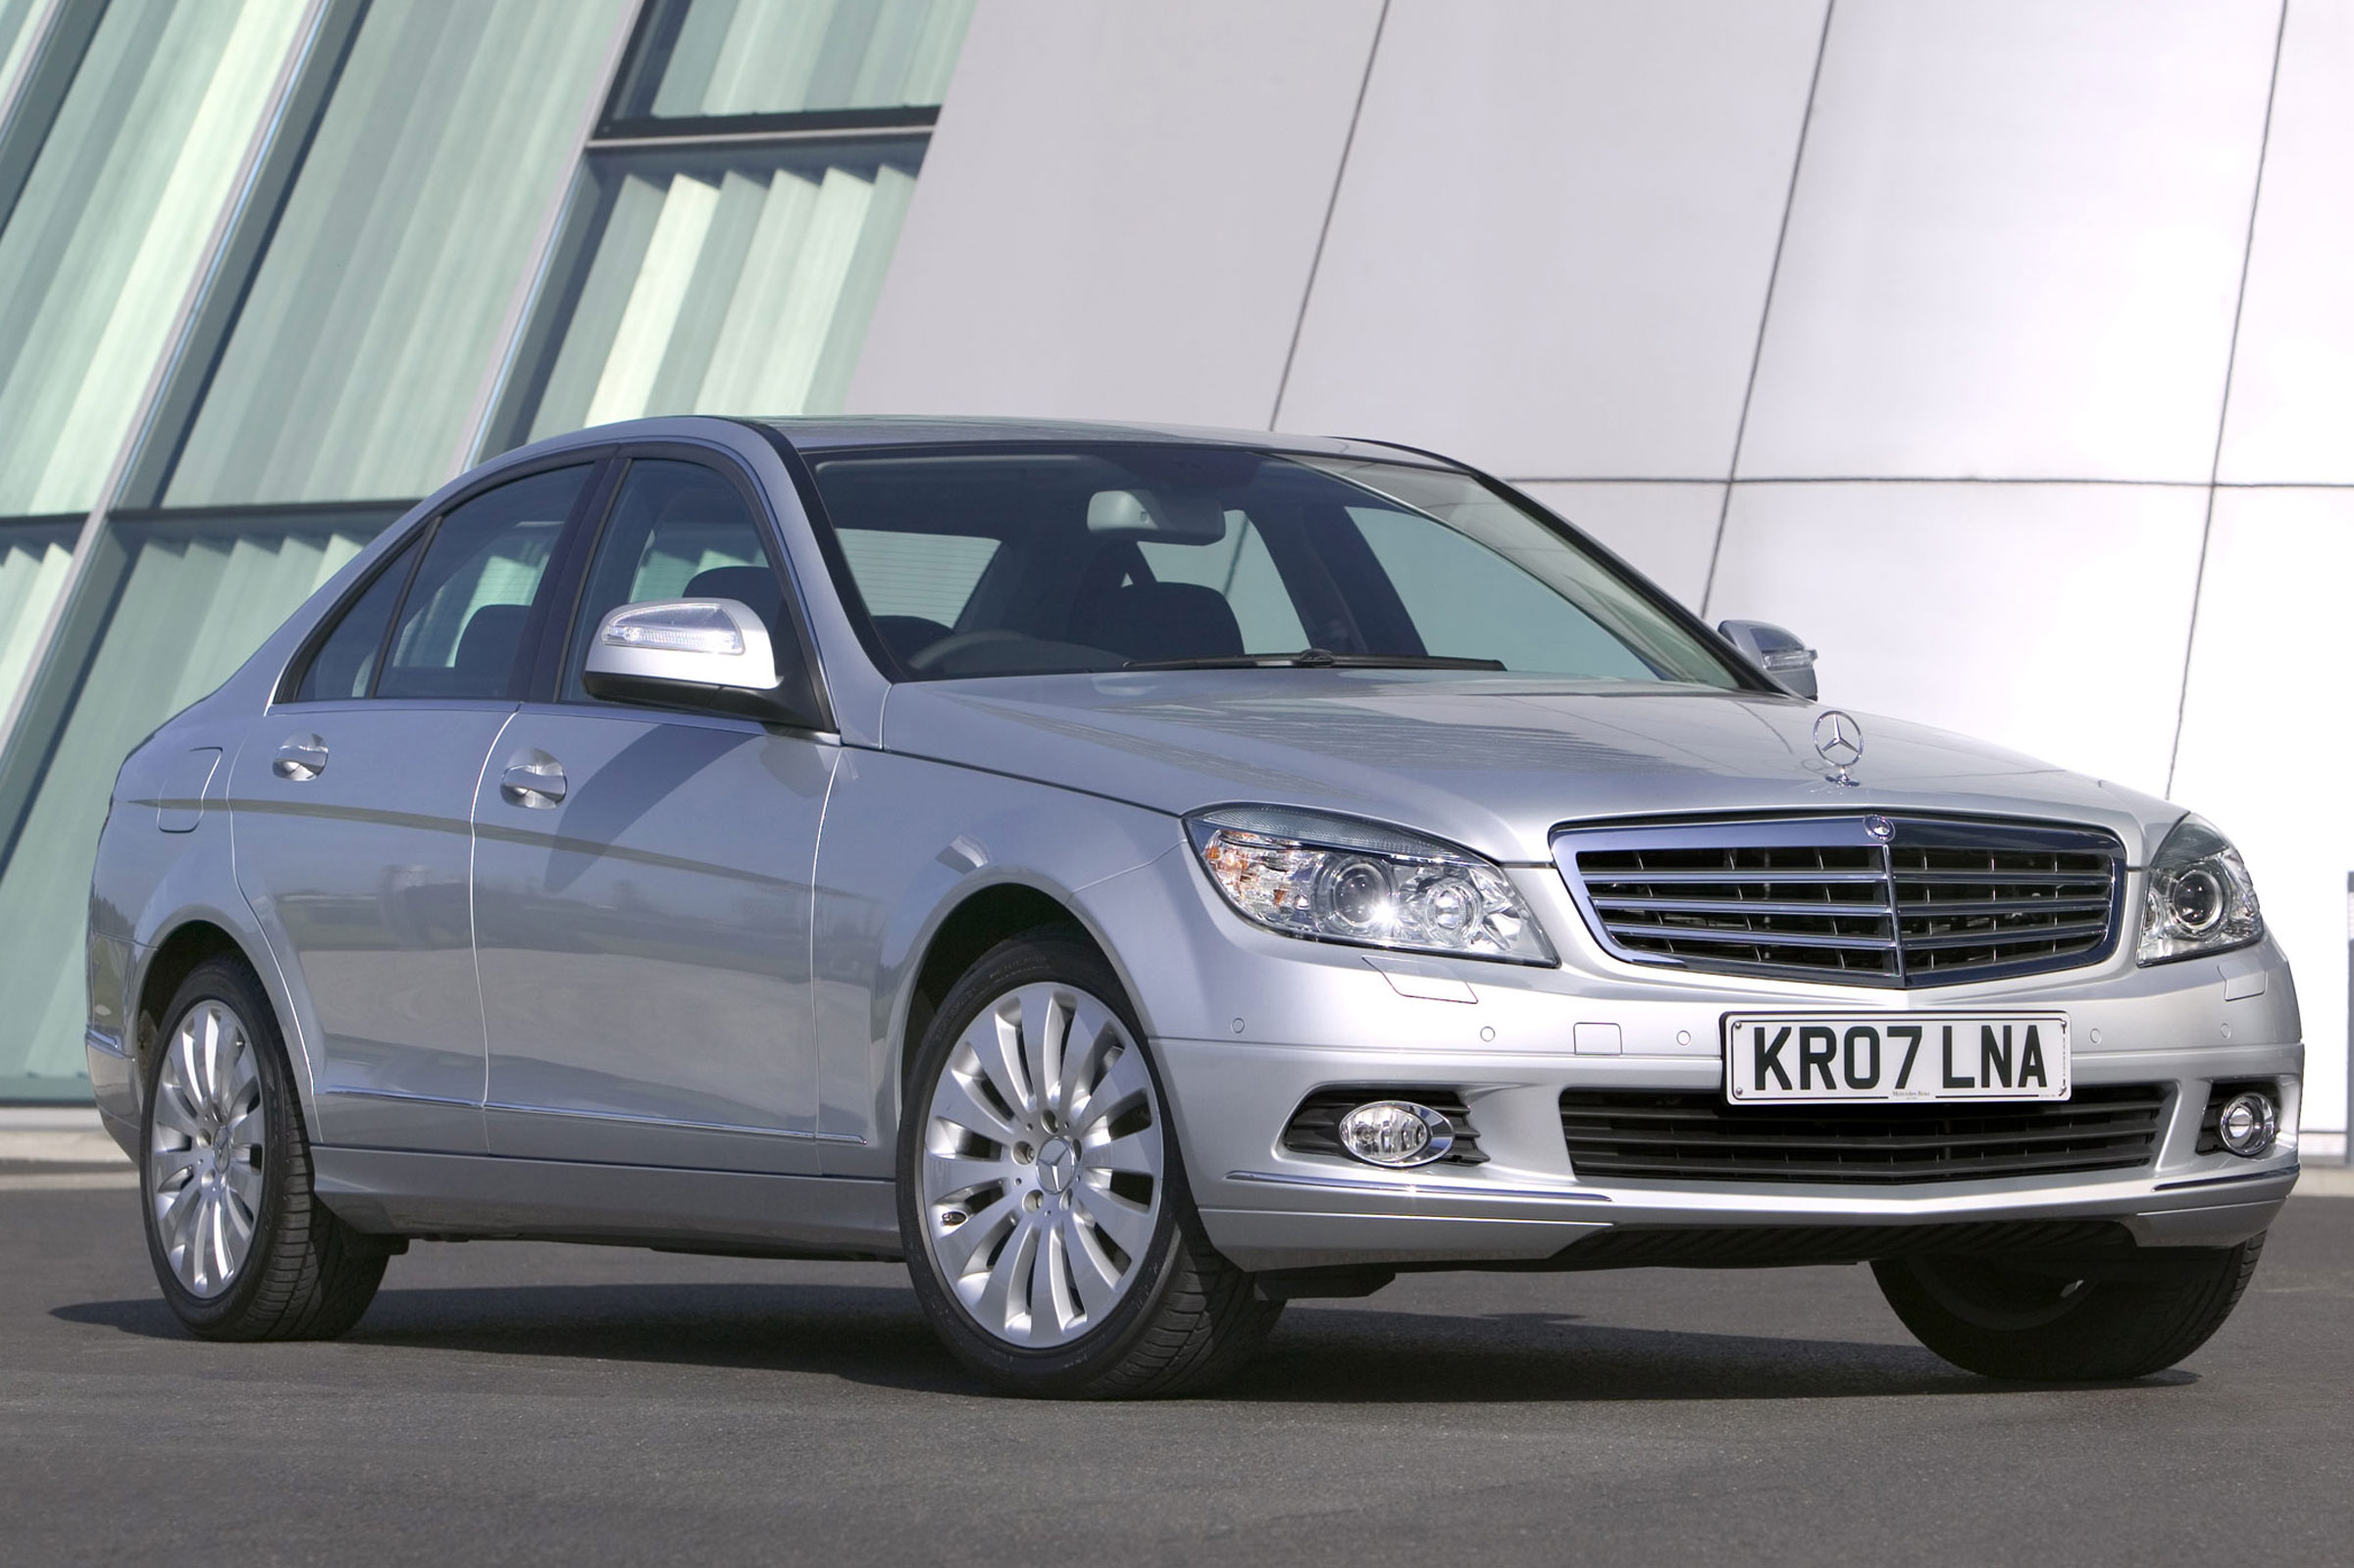 Used Mercedes C-Class buying guide: 2007-2014 (Mk3)